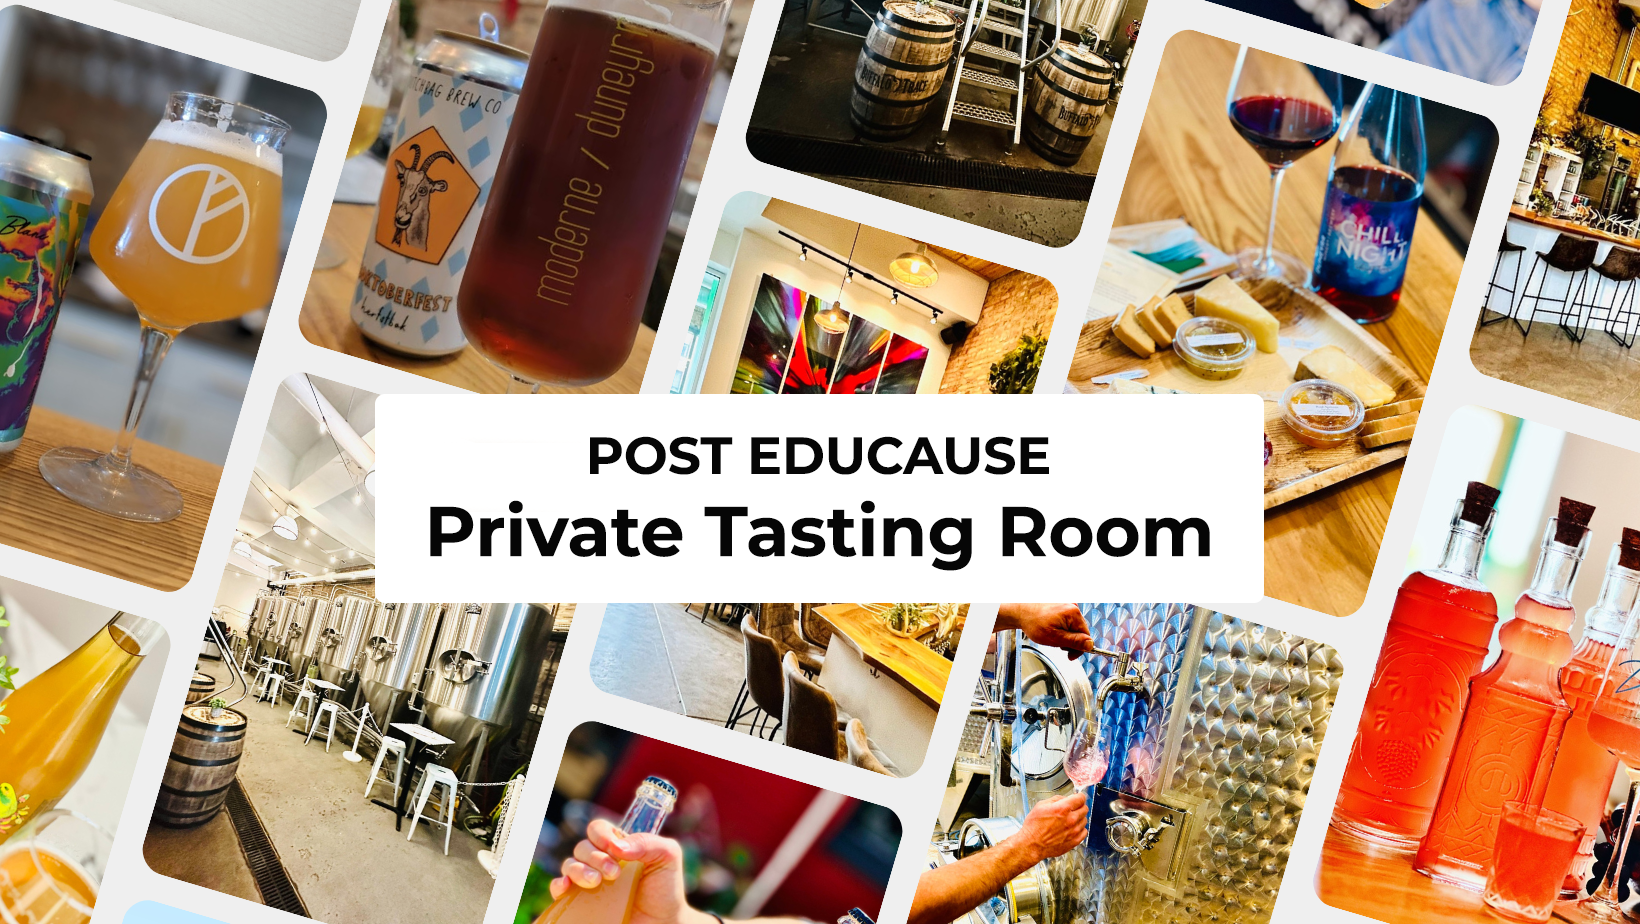 Join us for POST EDUCAUSE PRIVATE TASTING ROOM at Duneyrr Fermenta Brewery in Chicago